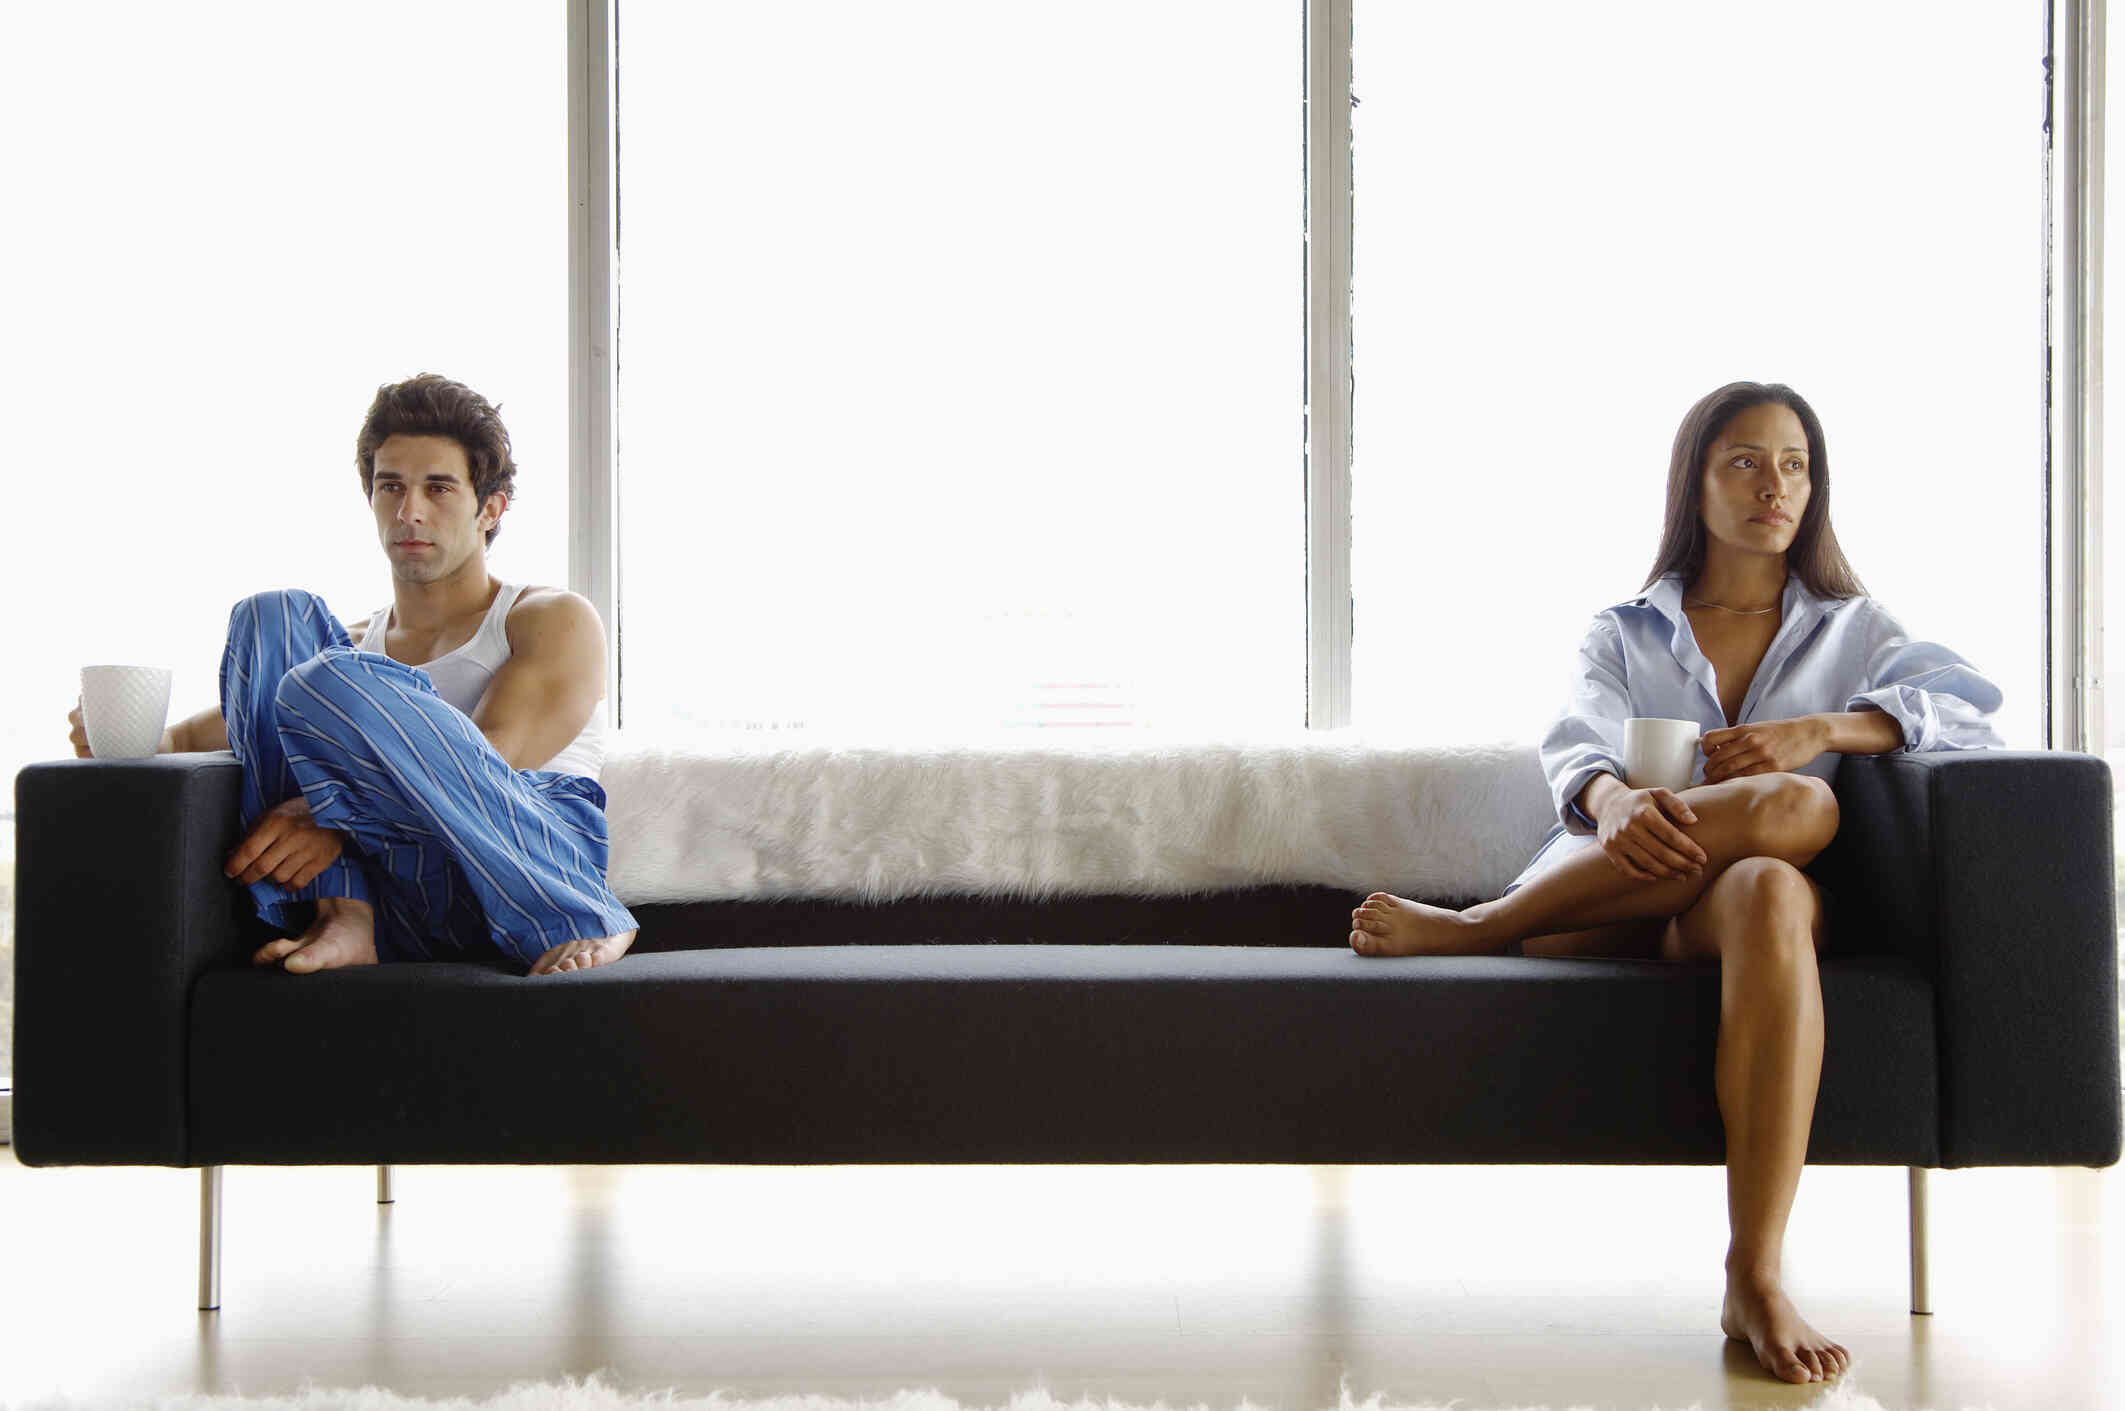 A male and female couple in pajamas sit on opposite ends of a couch while looking upset.